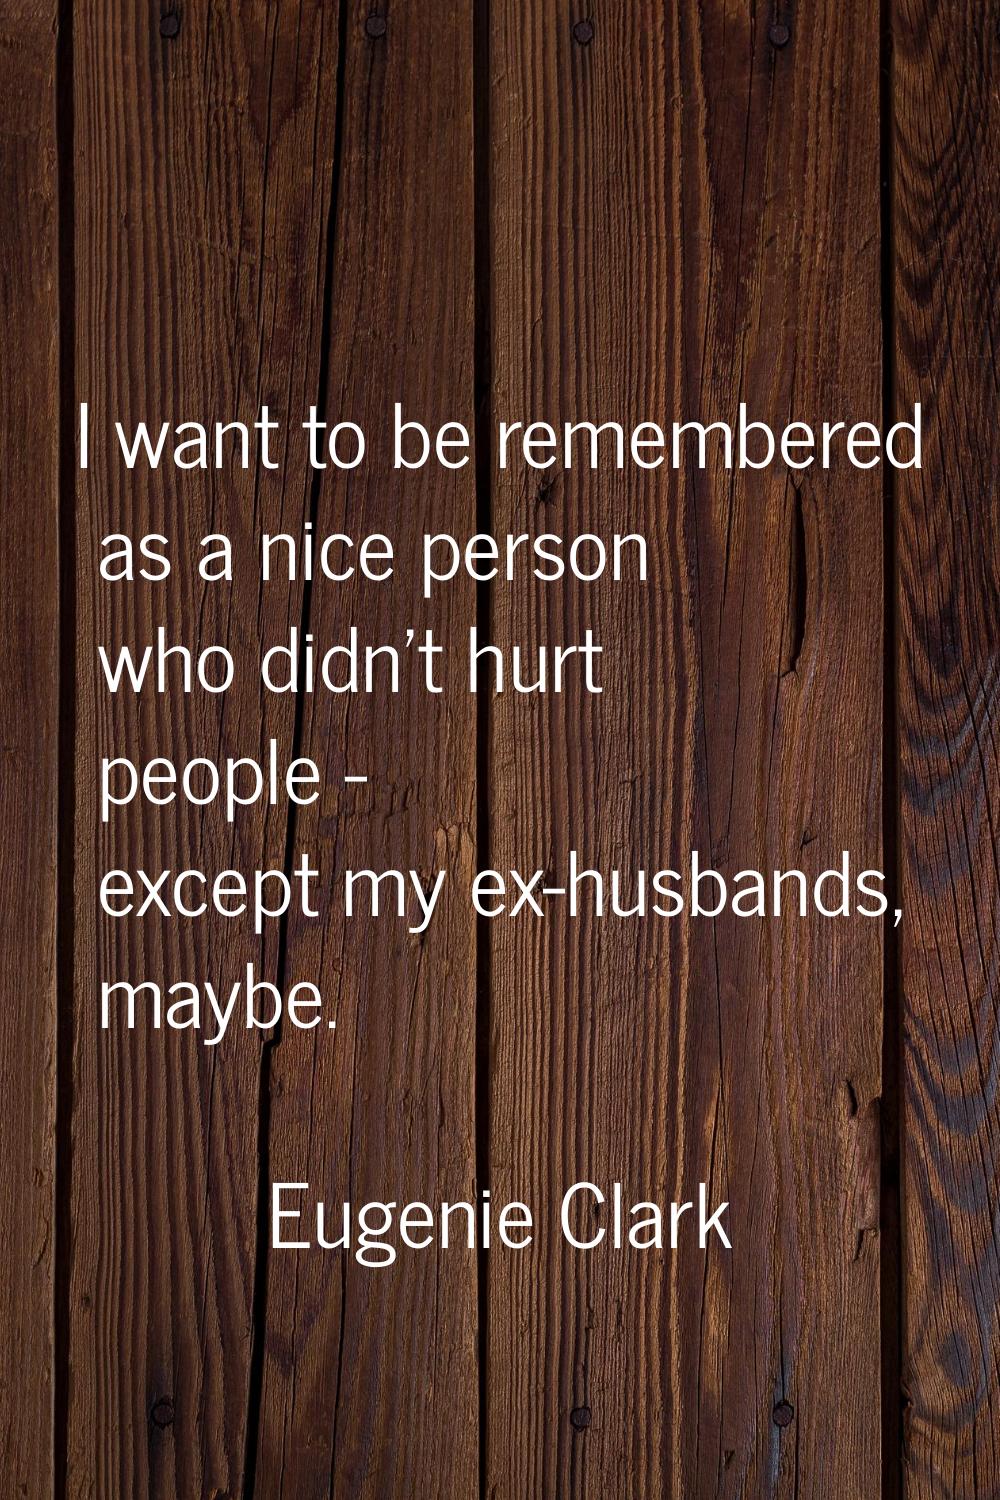 I want to be remembered as a nice person who didn't hurt people - except my ex-husbands, maybe.